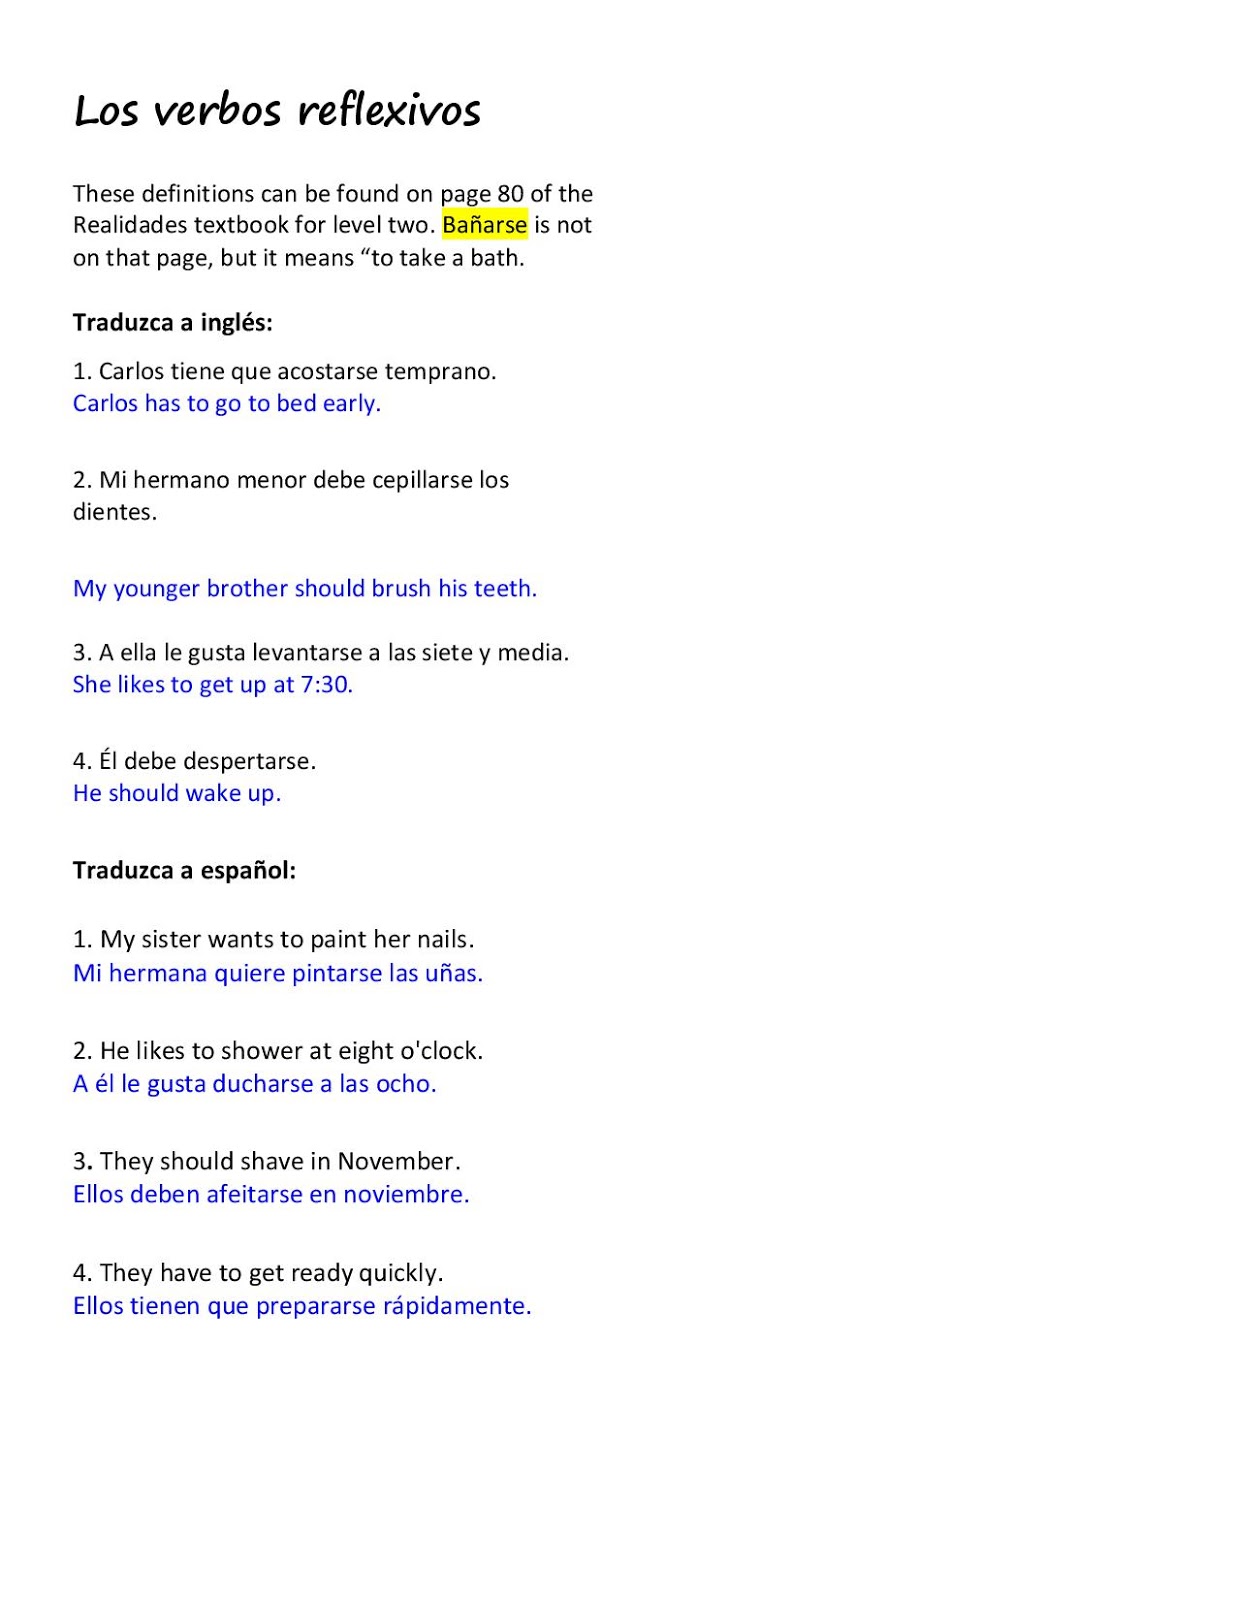 clases-de-espa-ol-answer-key-on-packet-given-tuesday-08-2015-reflexive-verbs